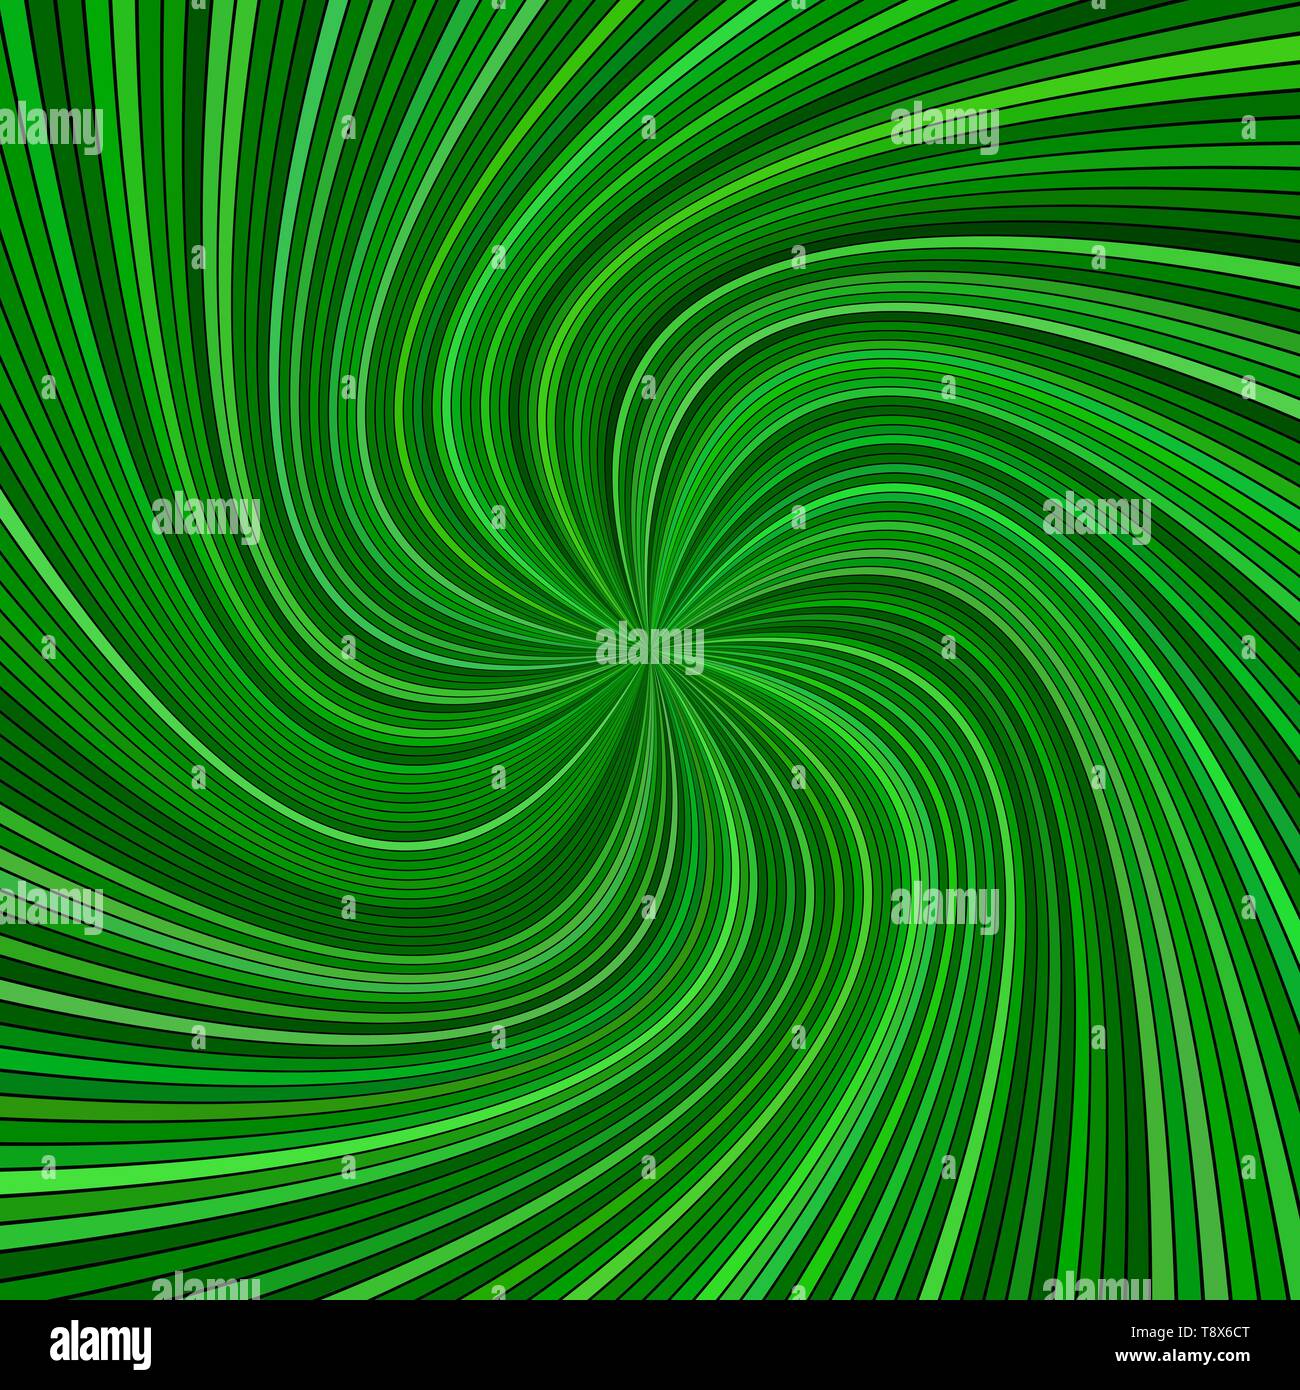 Green psychedelic abstract vortex background with striped rays Stock Vector